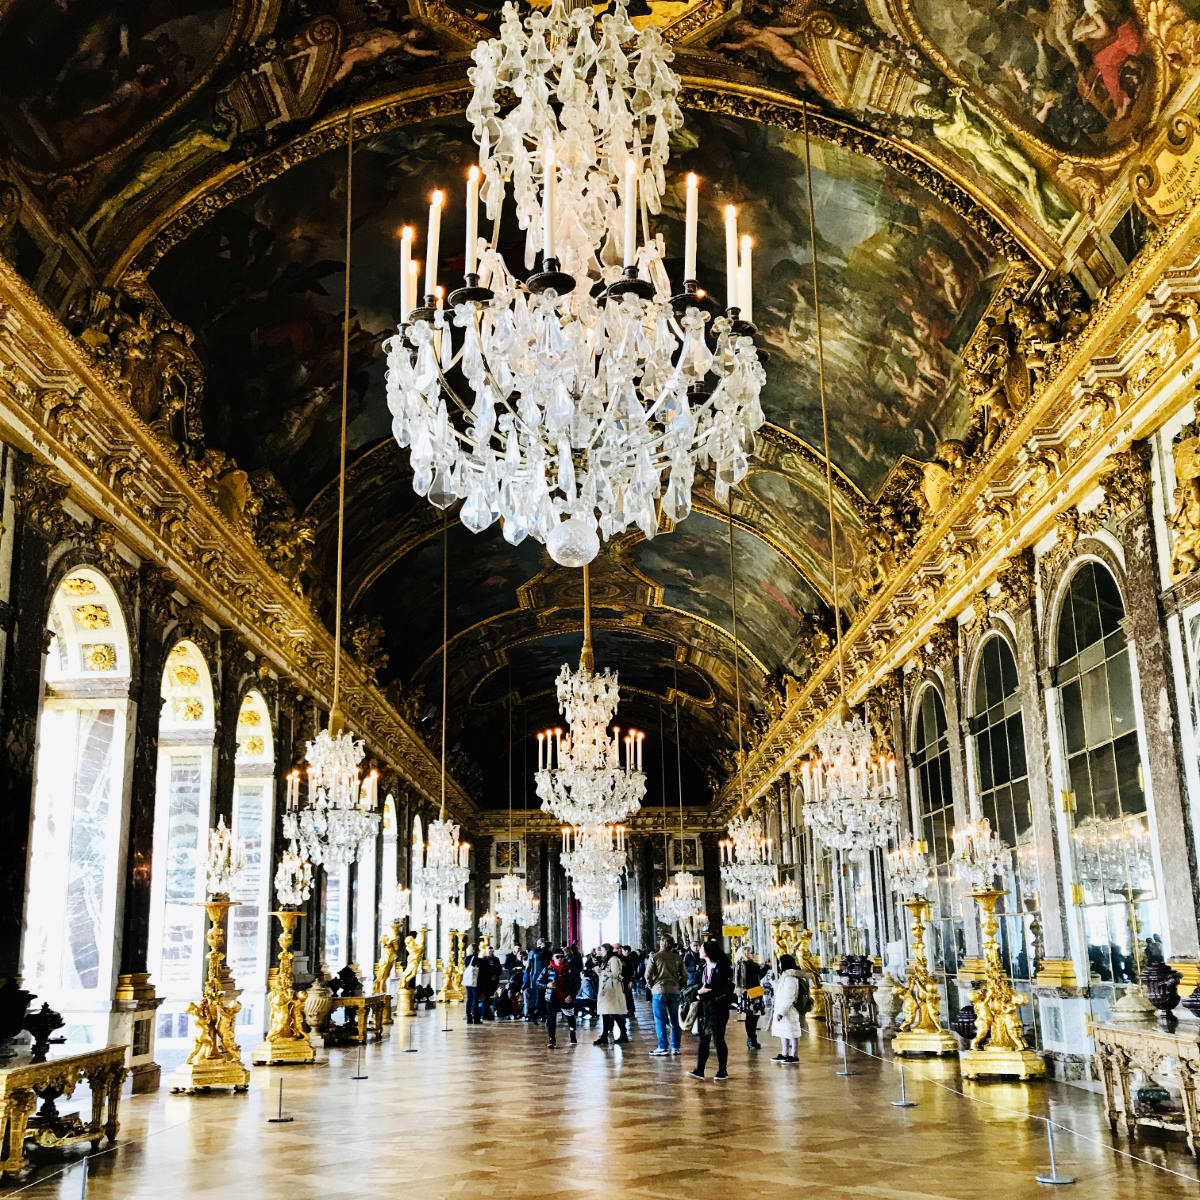 You are currently viewing Hall of Mirrors at Versailles: 16 Incredible facts and history